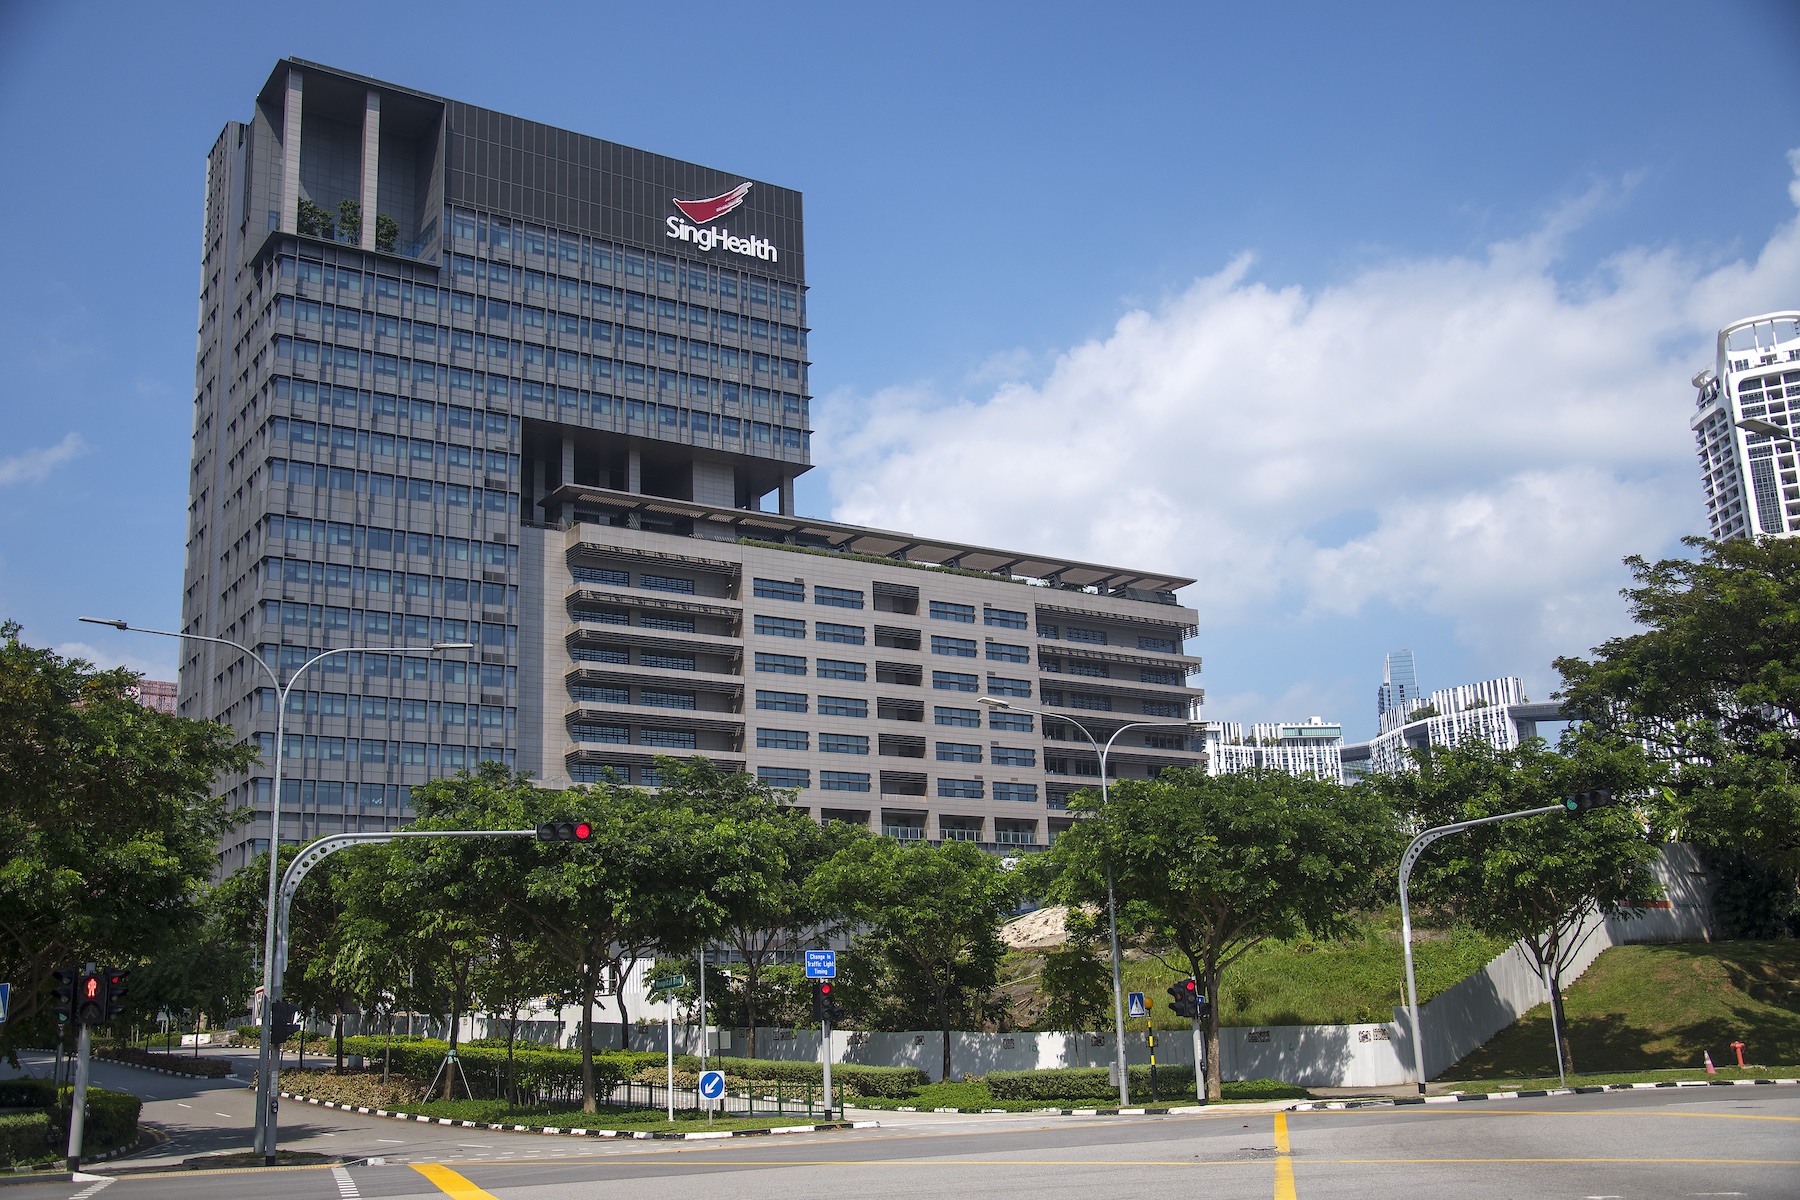 The outside of SingHealth tower in Singapore from street view
